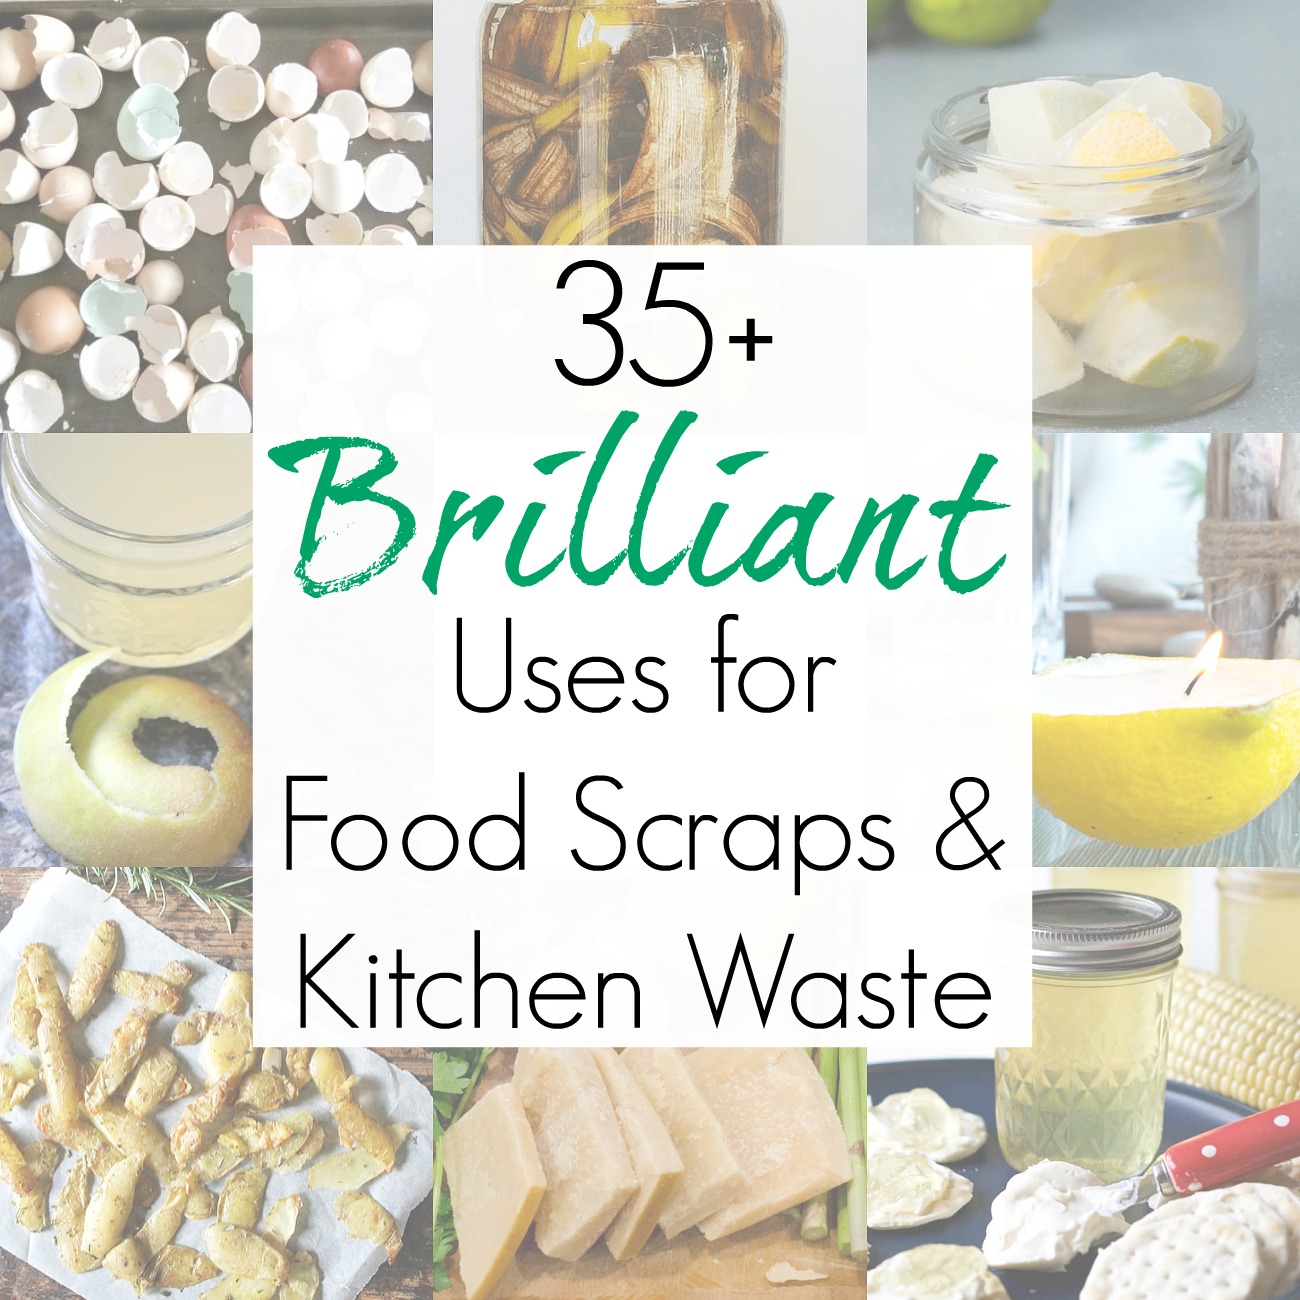 Clever Ways to Use Food Waste and Kitchen Scraps